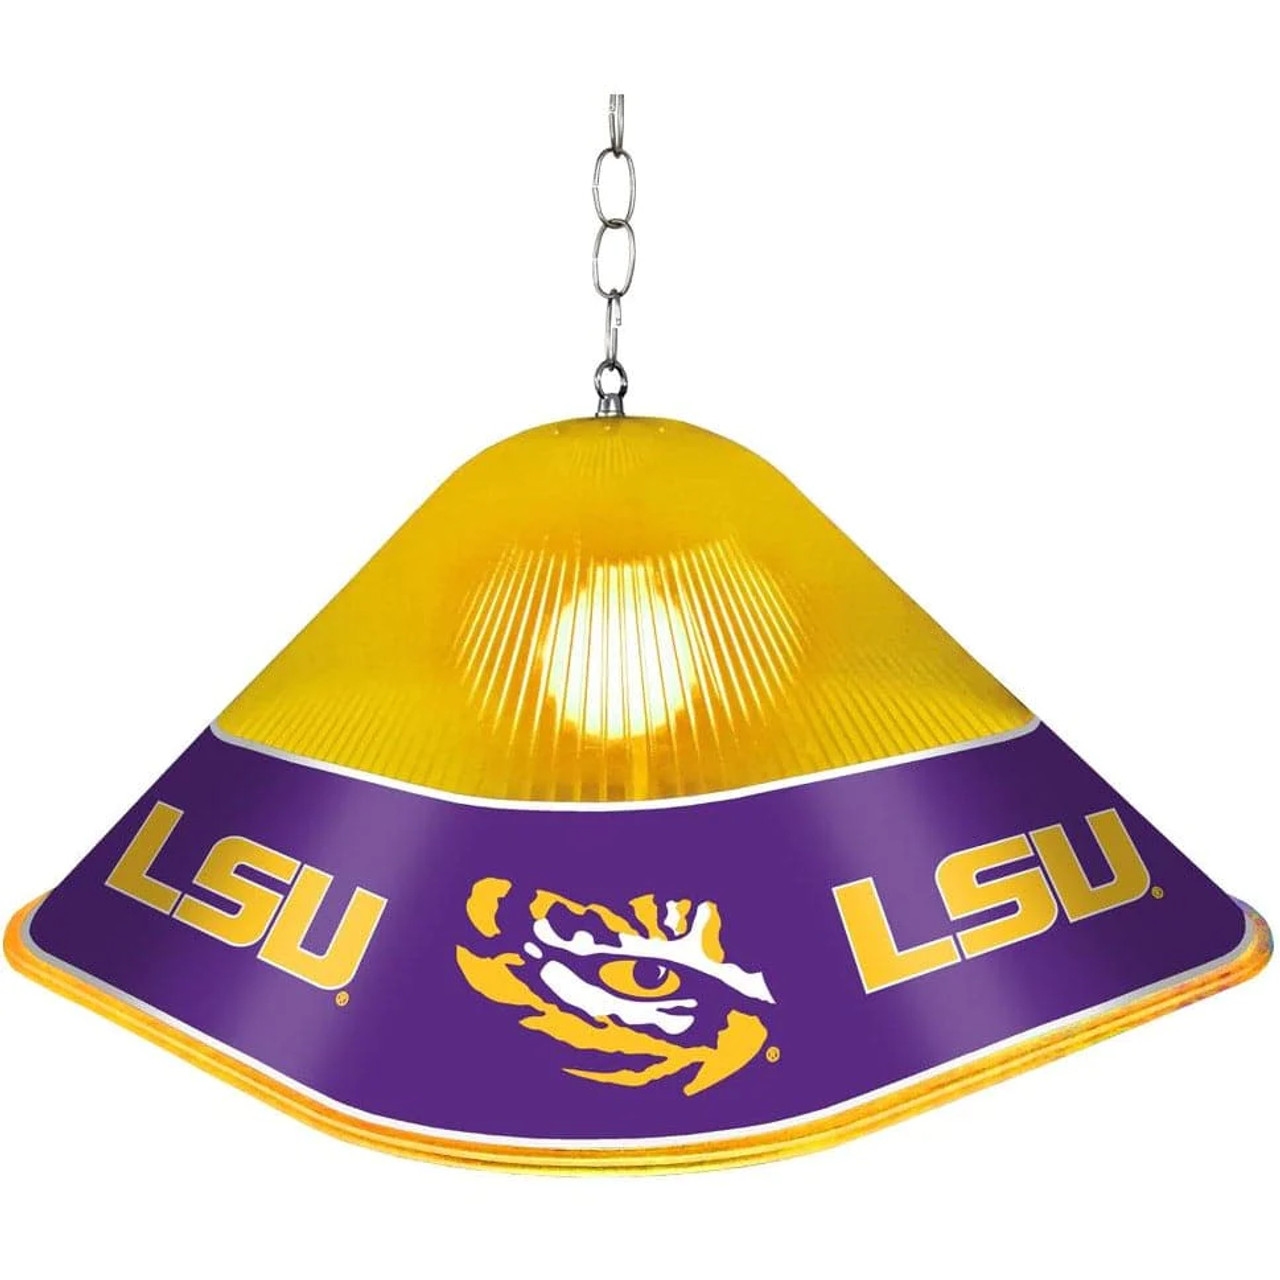 LSU, Louisiana, State, St, Tigers, Game, Room, Cave, Table, Light, Lamp,NCLSUT-410-01A, NCLSUT-410-01B, The Fan-Brand, 666703467313